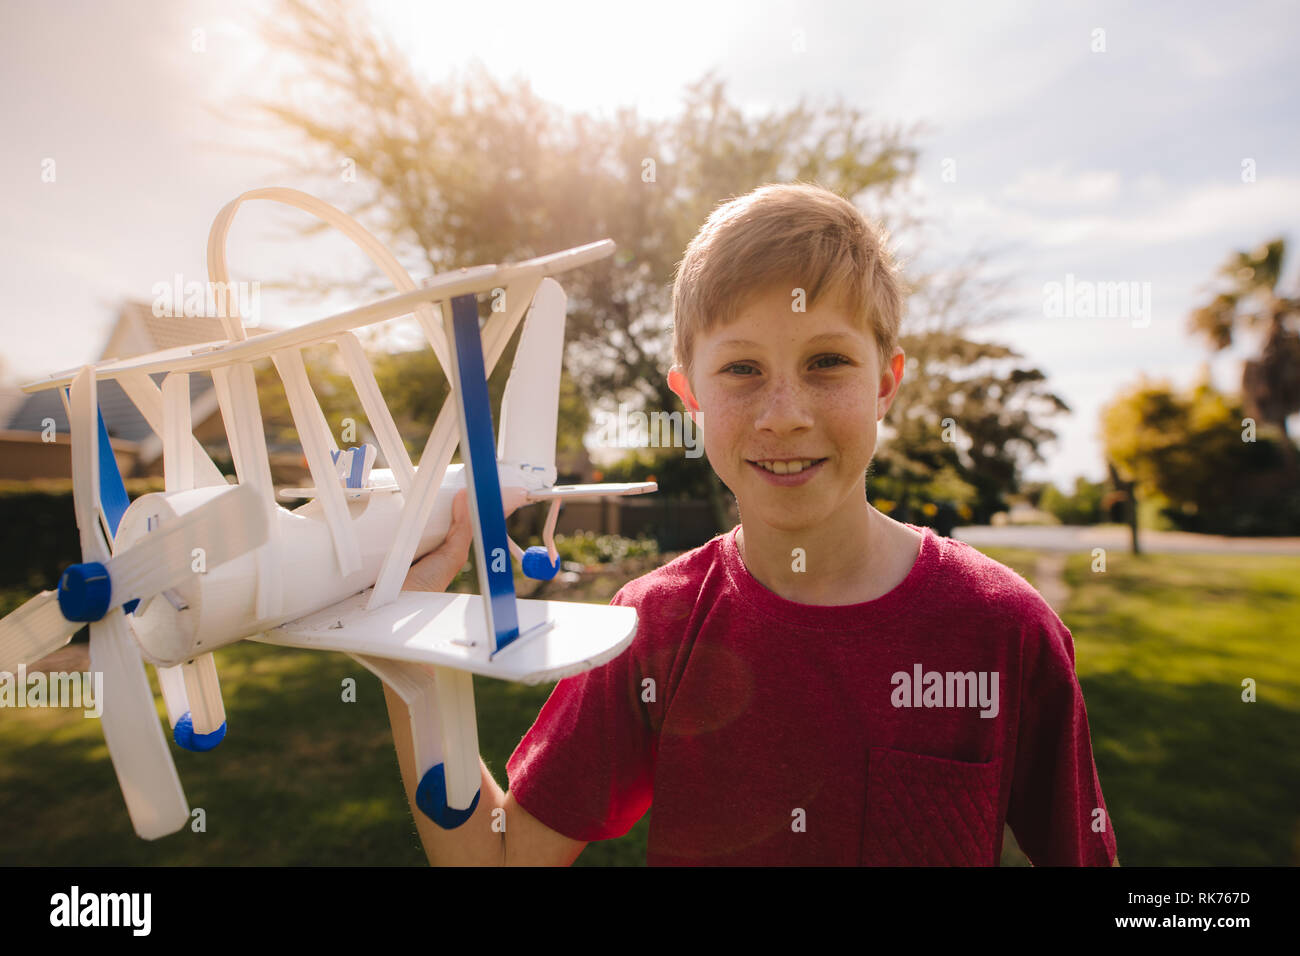 Happy young boy with a toy plane outdoors looking at camera. Preteen boy playing with his toy plane. Stock Photo